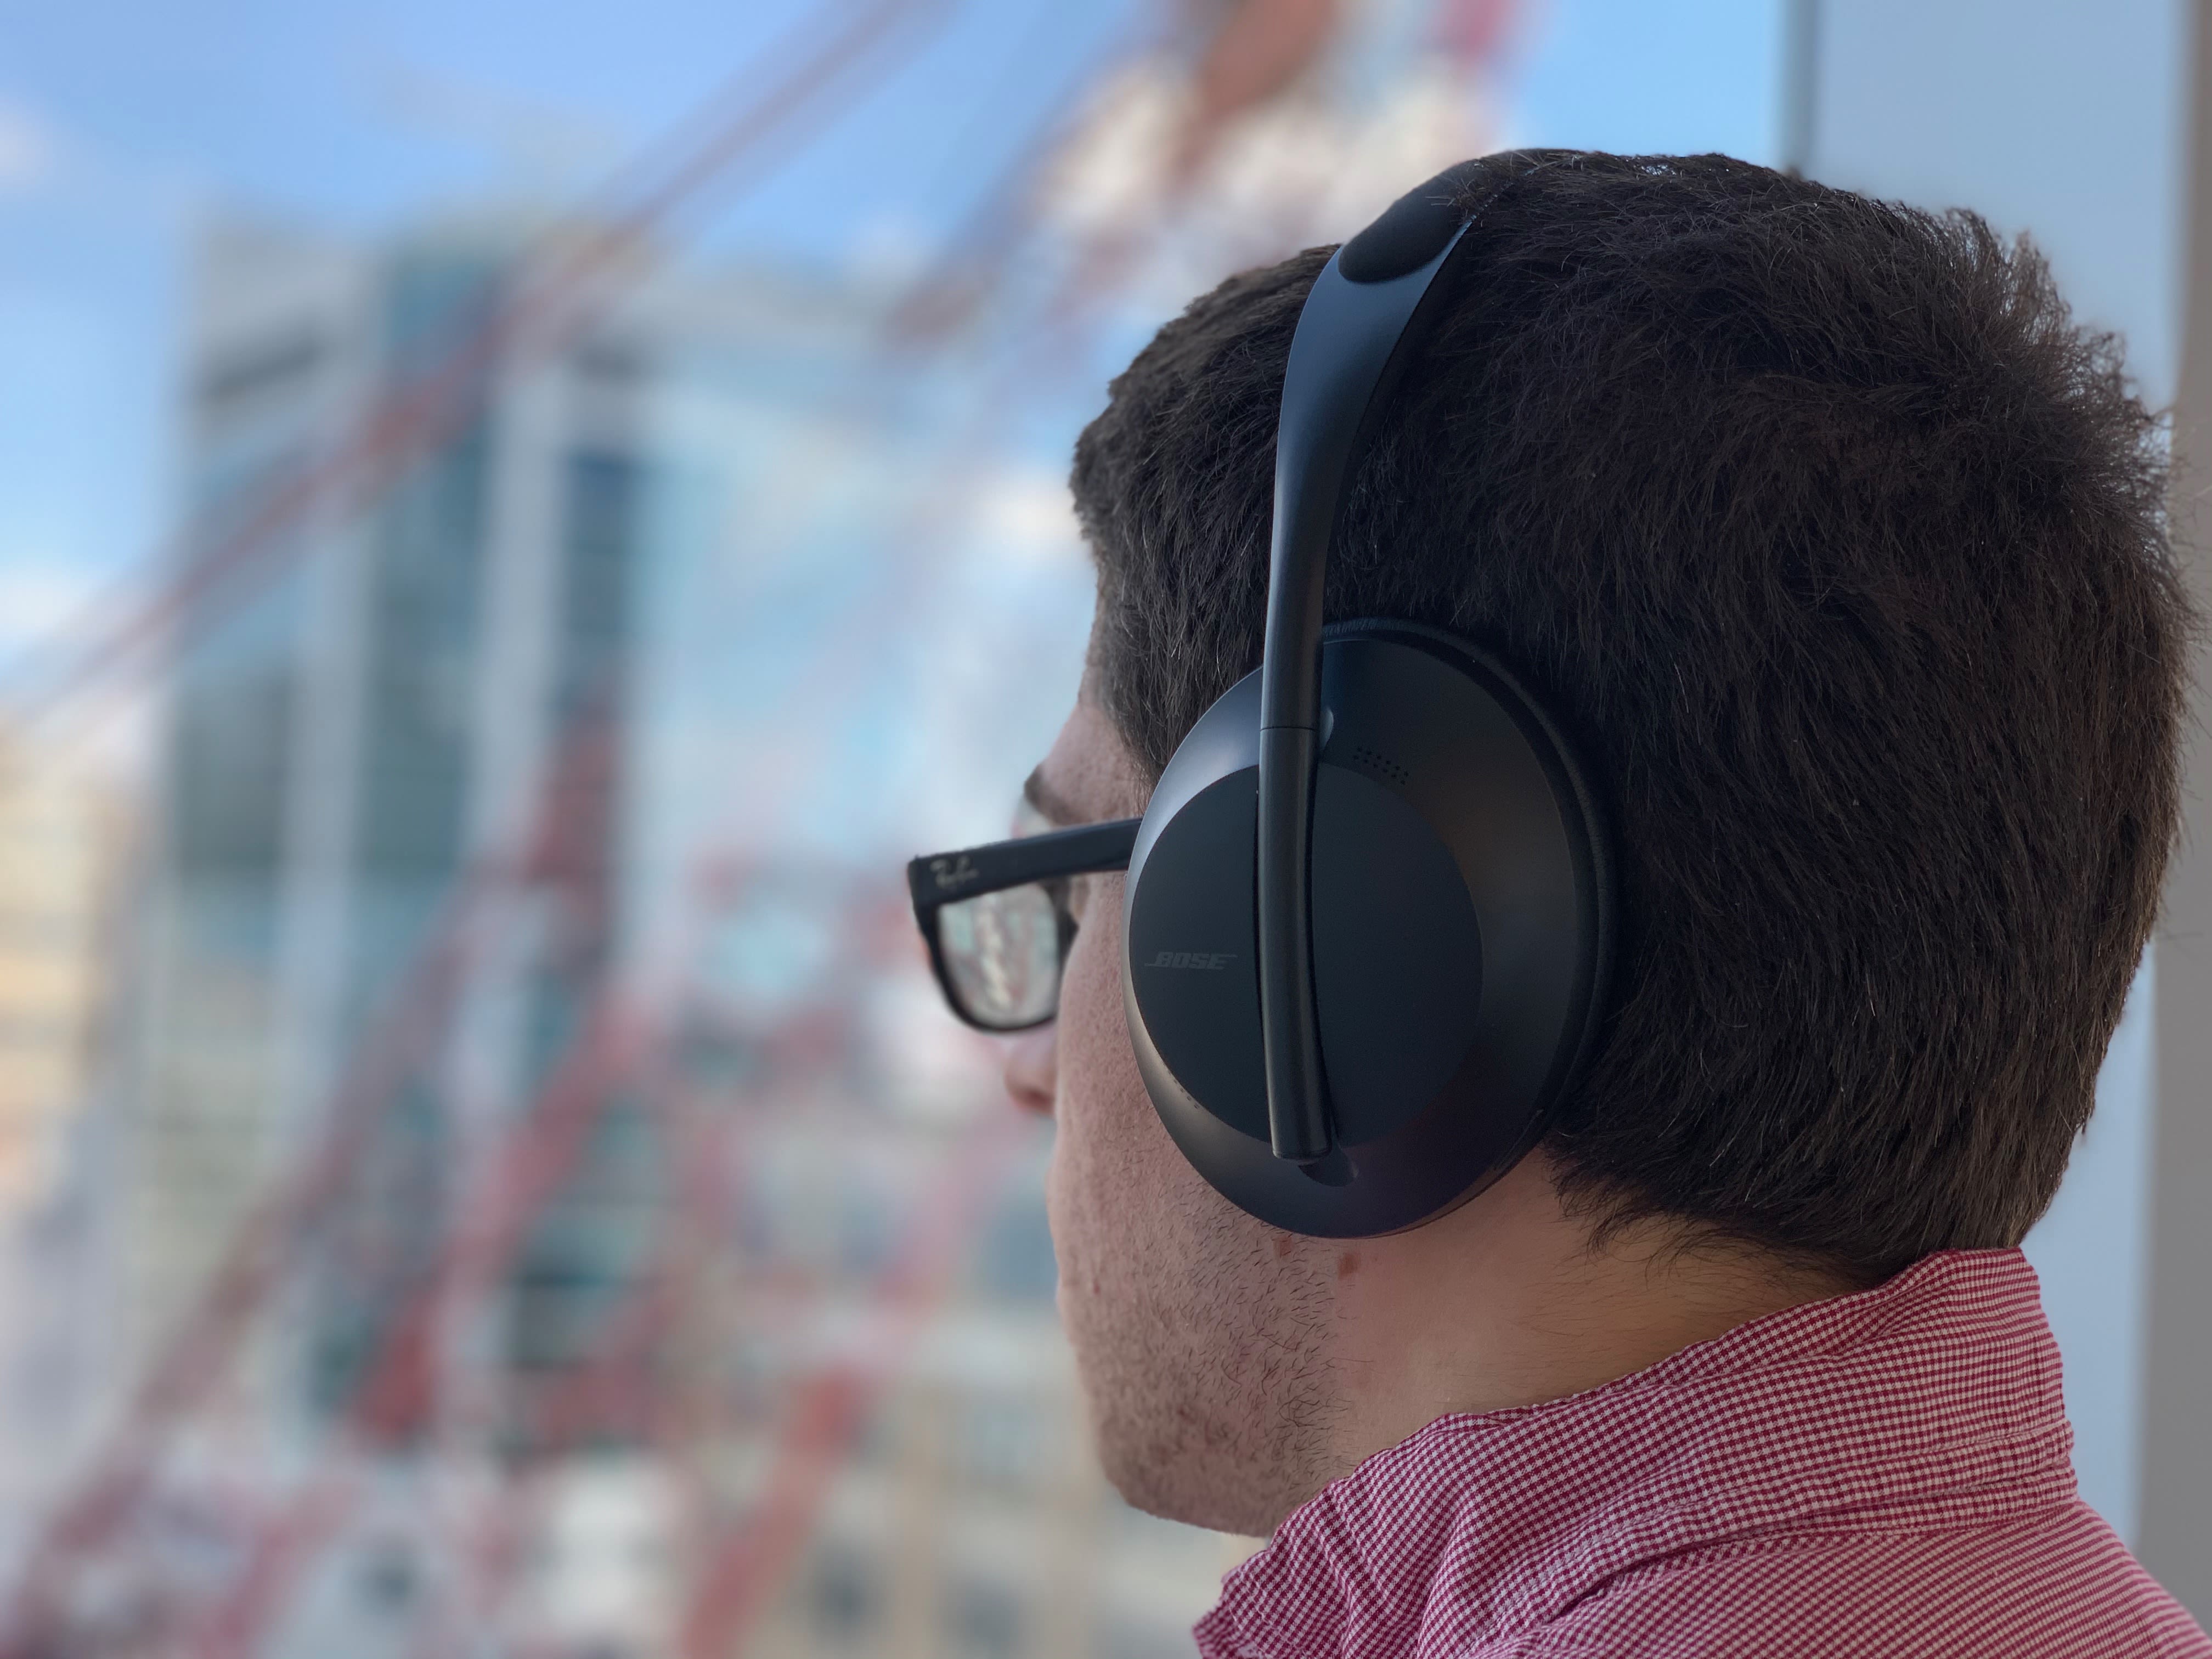 Bose 700 headphones review: Impressive noise cancellation with sleek design